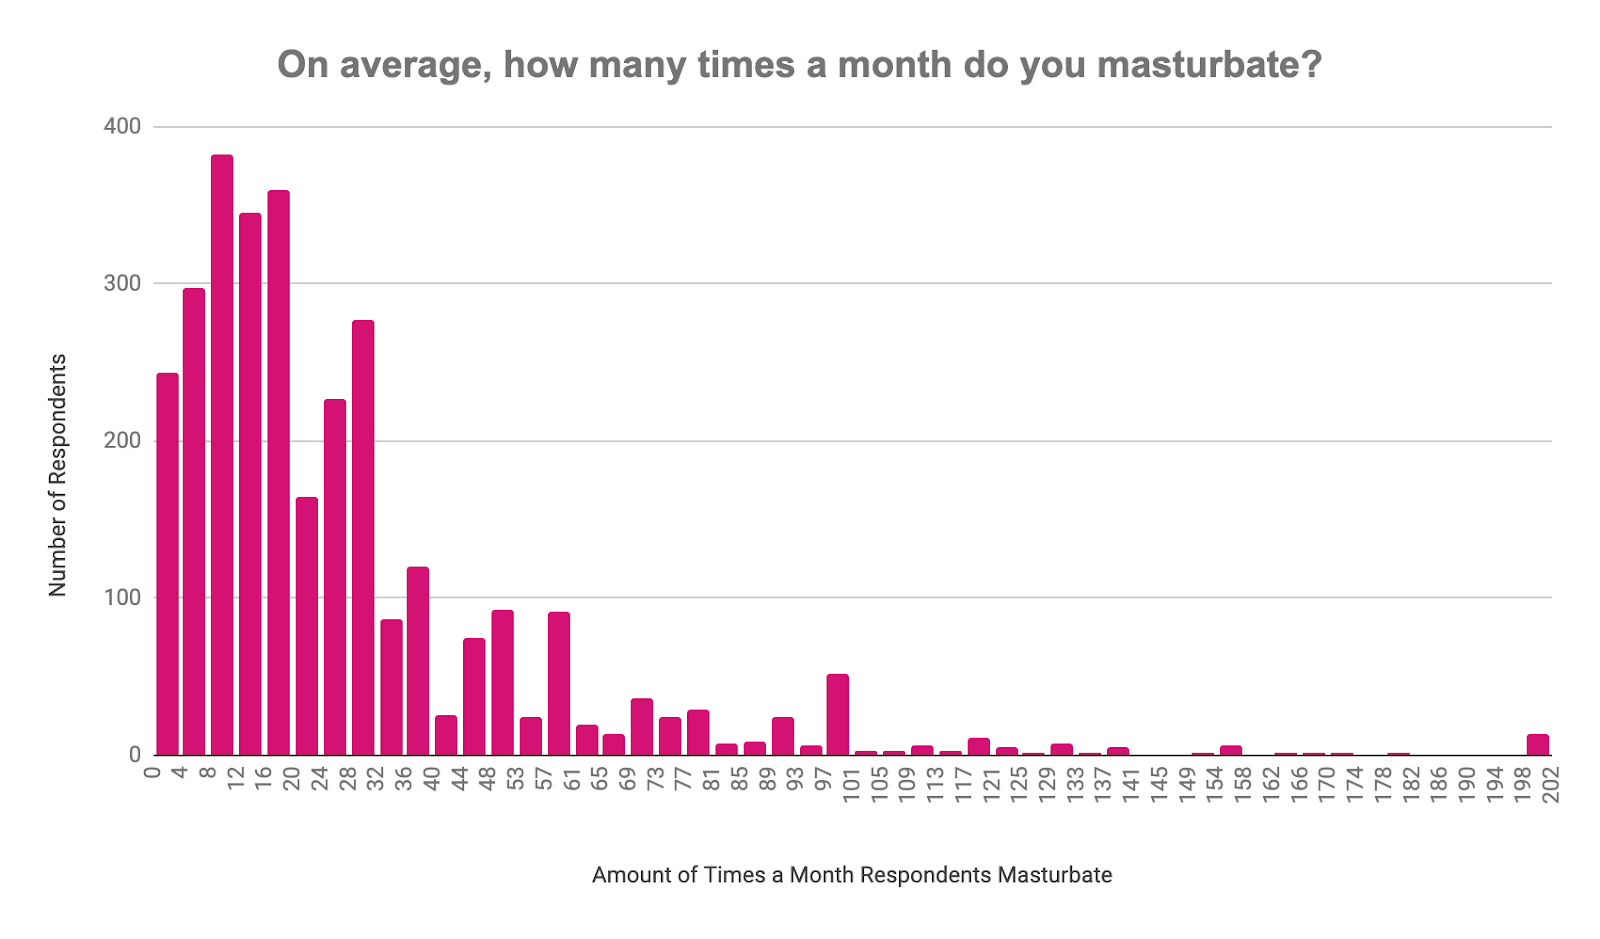 Times people reported masturbating per month